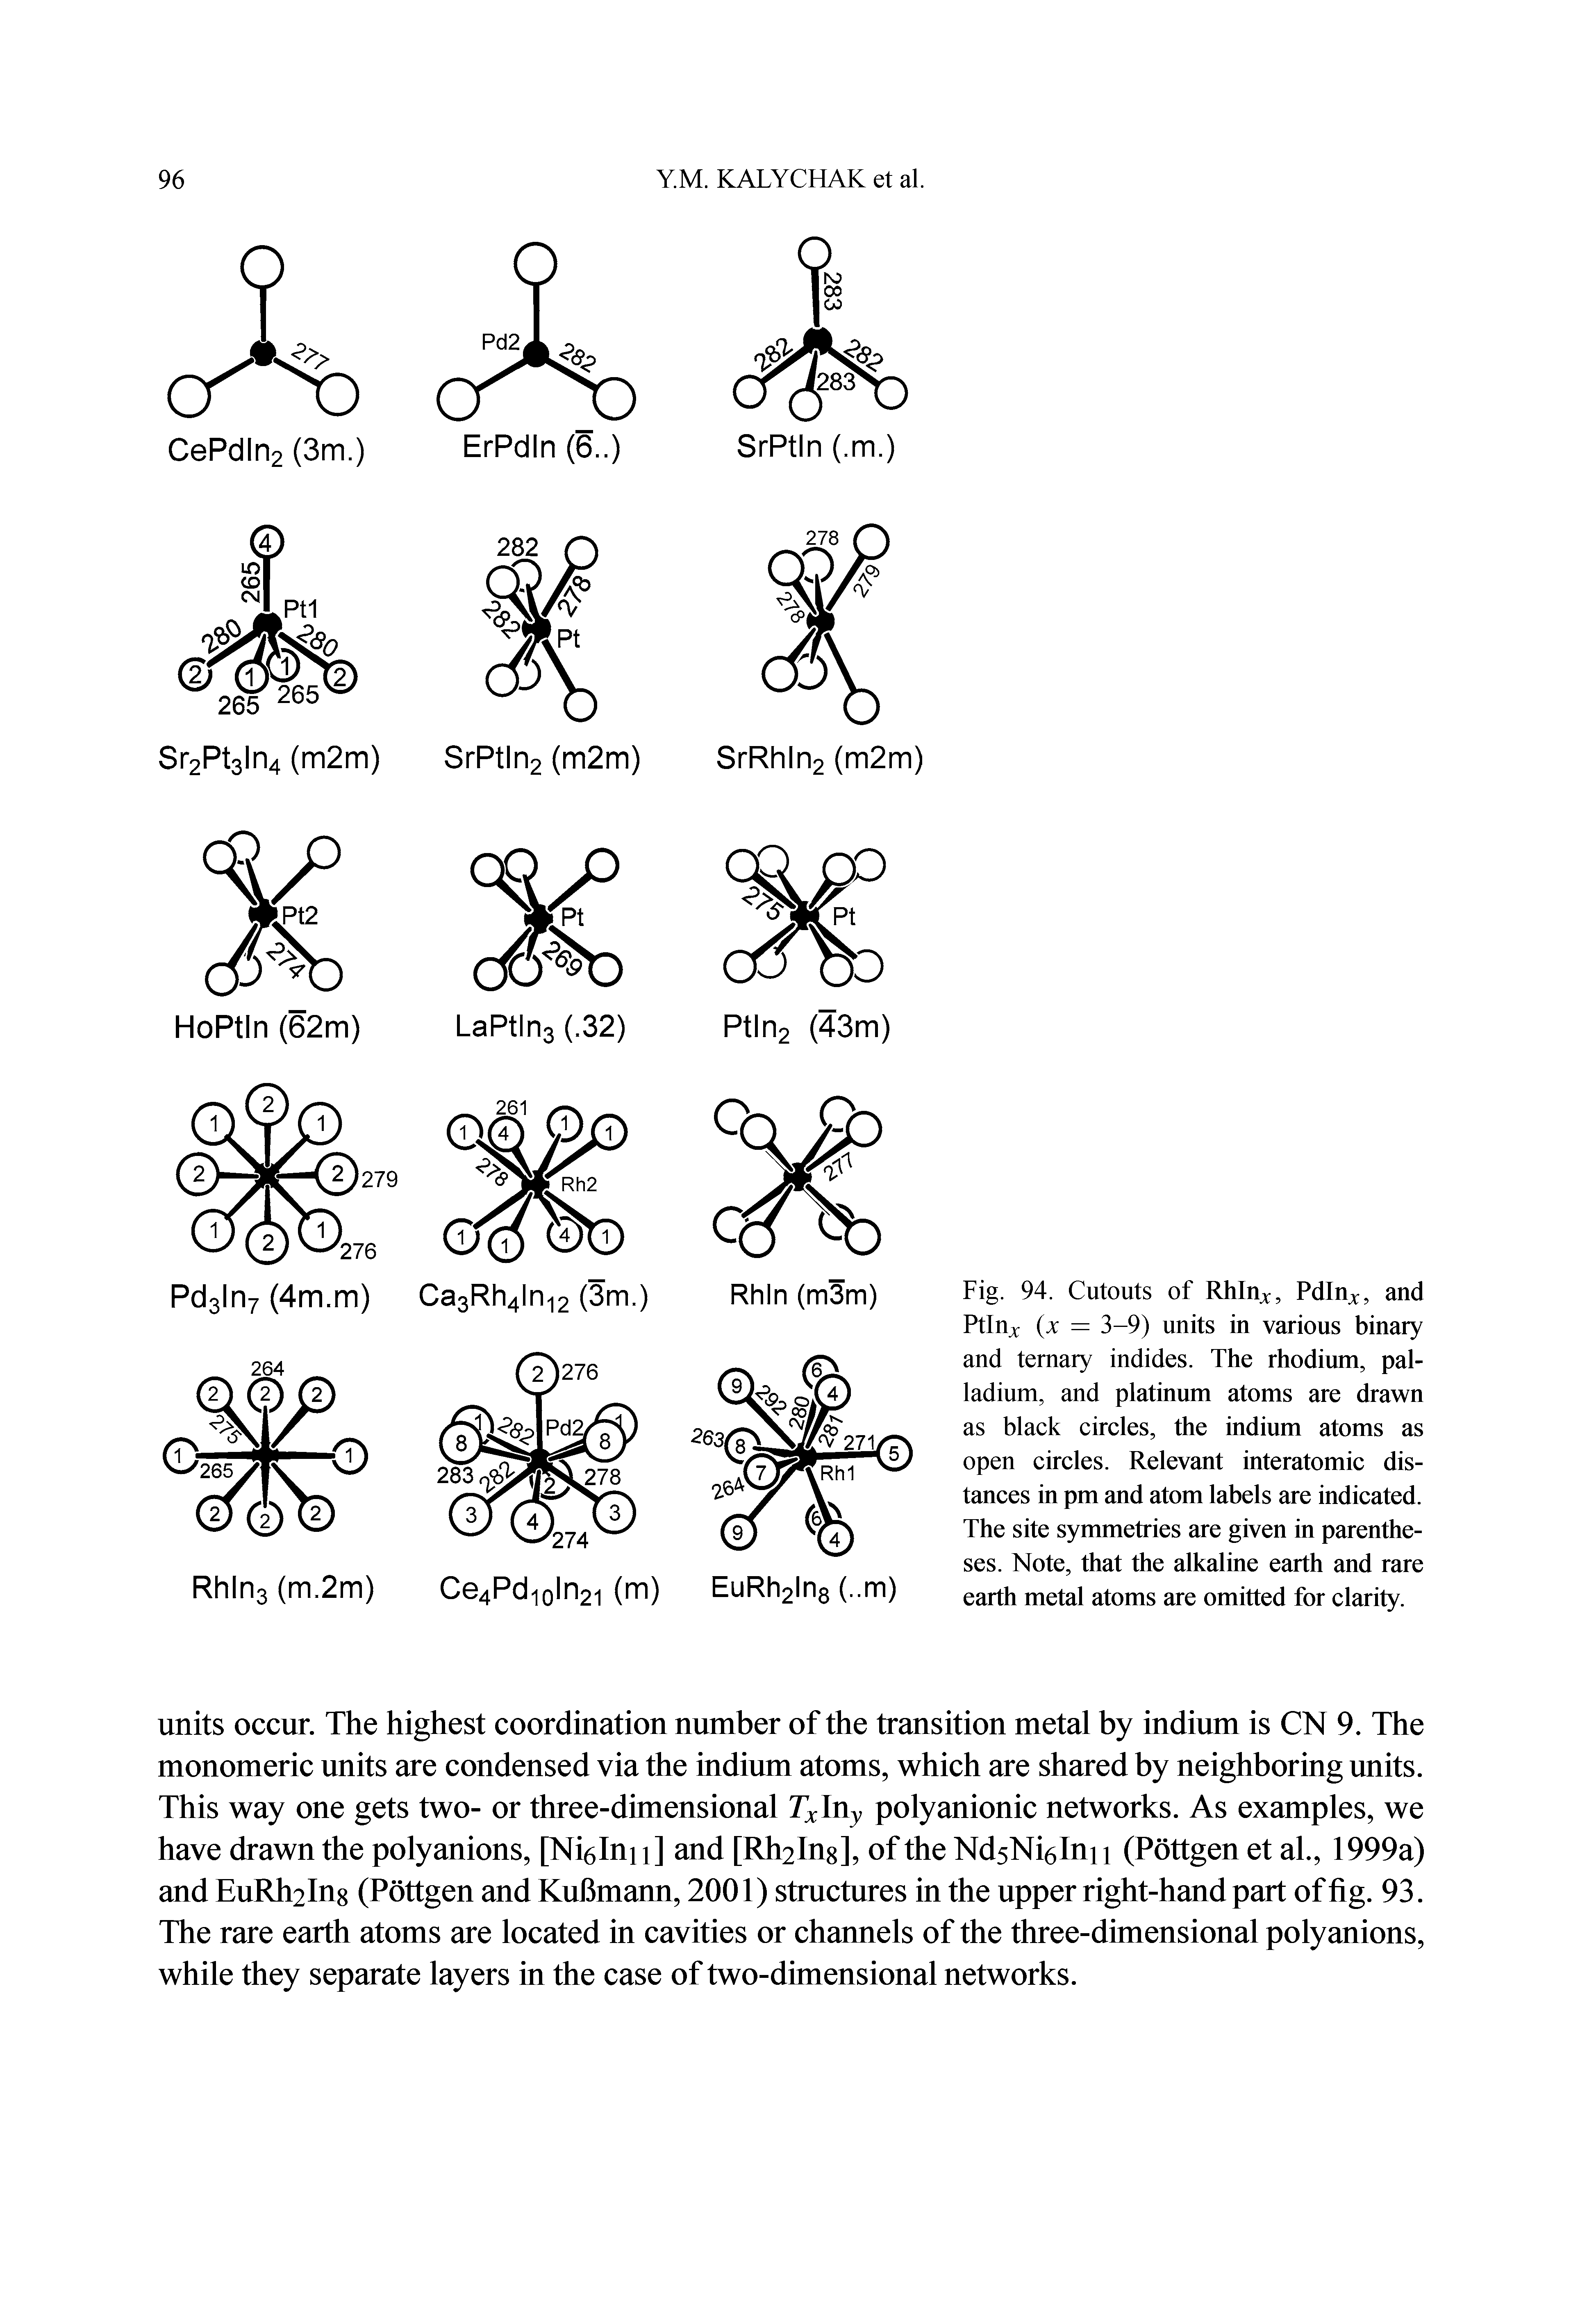 Fig. 94. Cutouts of Rhlujc, Pdluj, and Ptinjc (x = 3-9) units in various binary and ternary indides. The rhodium, palladium, and platinum atoms are drawn as blaek eircles, the indium atoms as open eircles. Relevant interatomic distances in pm and atom labels are indicated. The site symmetries are given in parentheses. Note, that the alkaline earth and rare earth metal atoms are omitted for clarity.